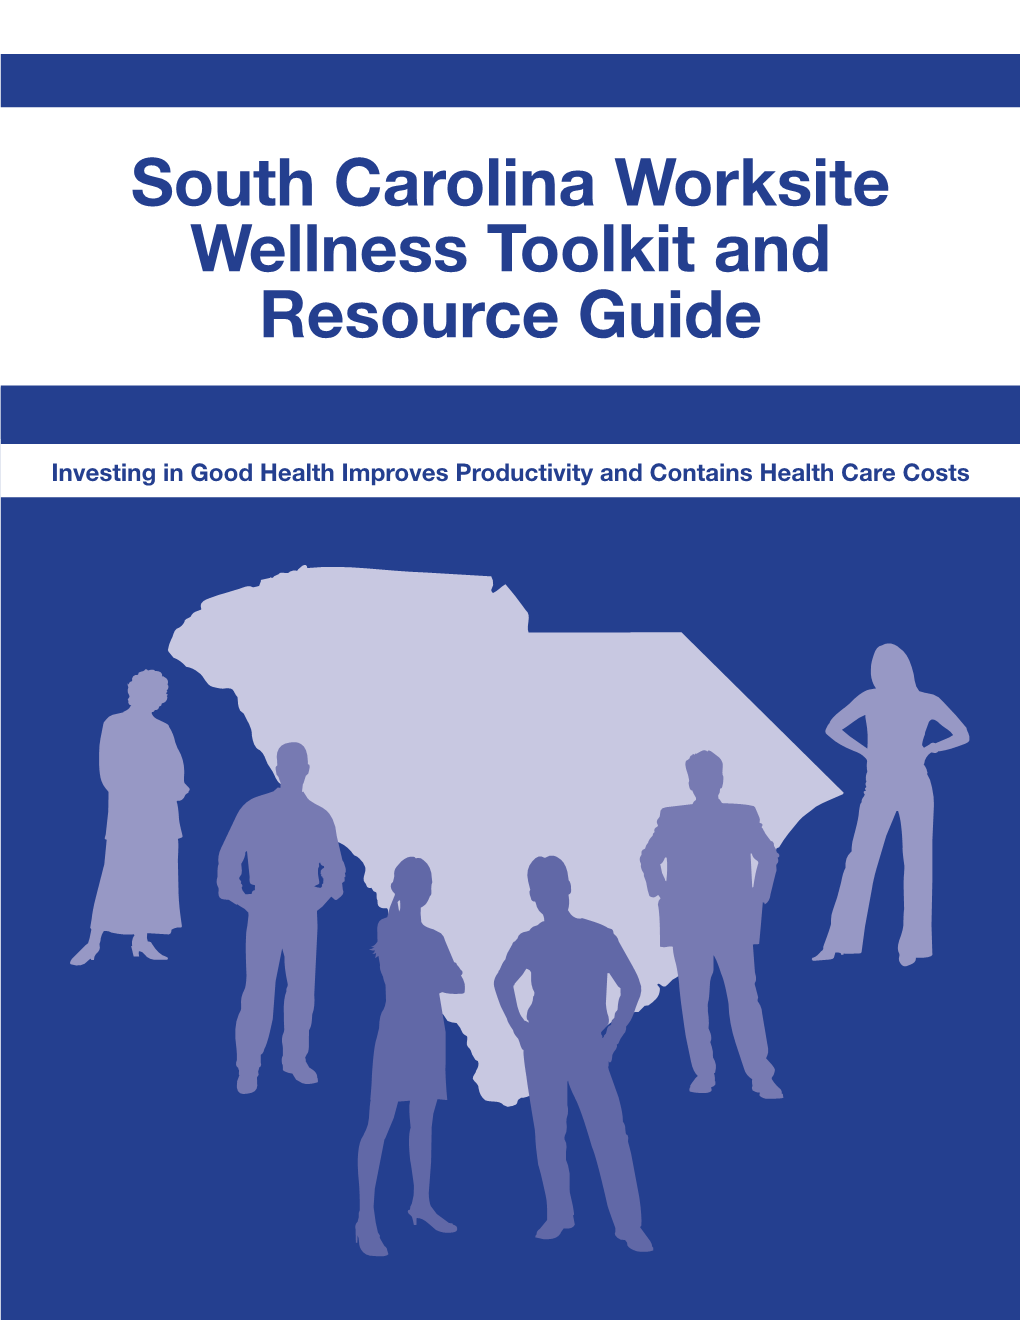 South Carolina Worksite Wellness Toolkit and Resource Guide